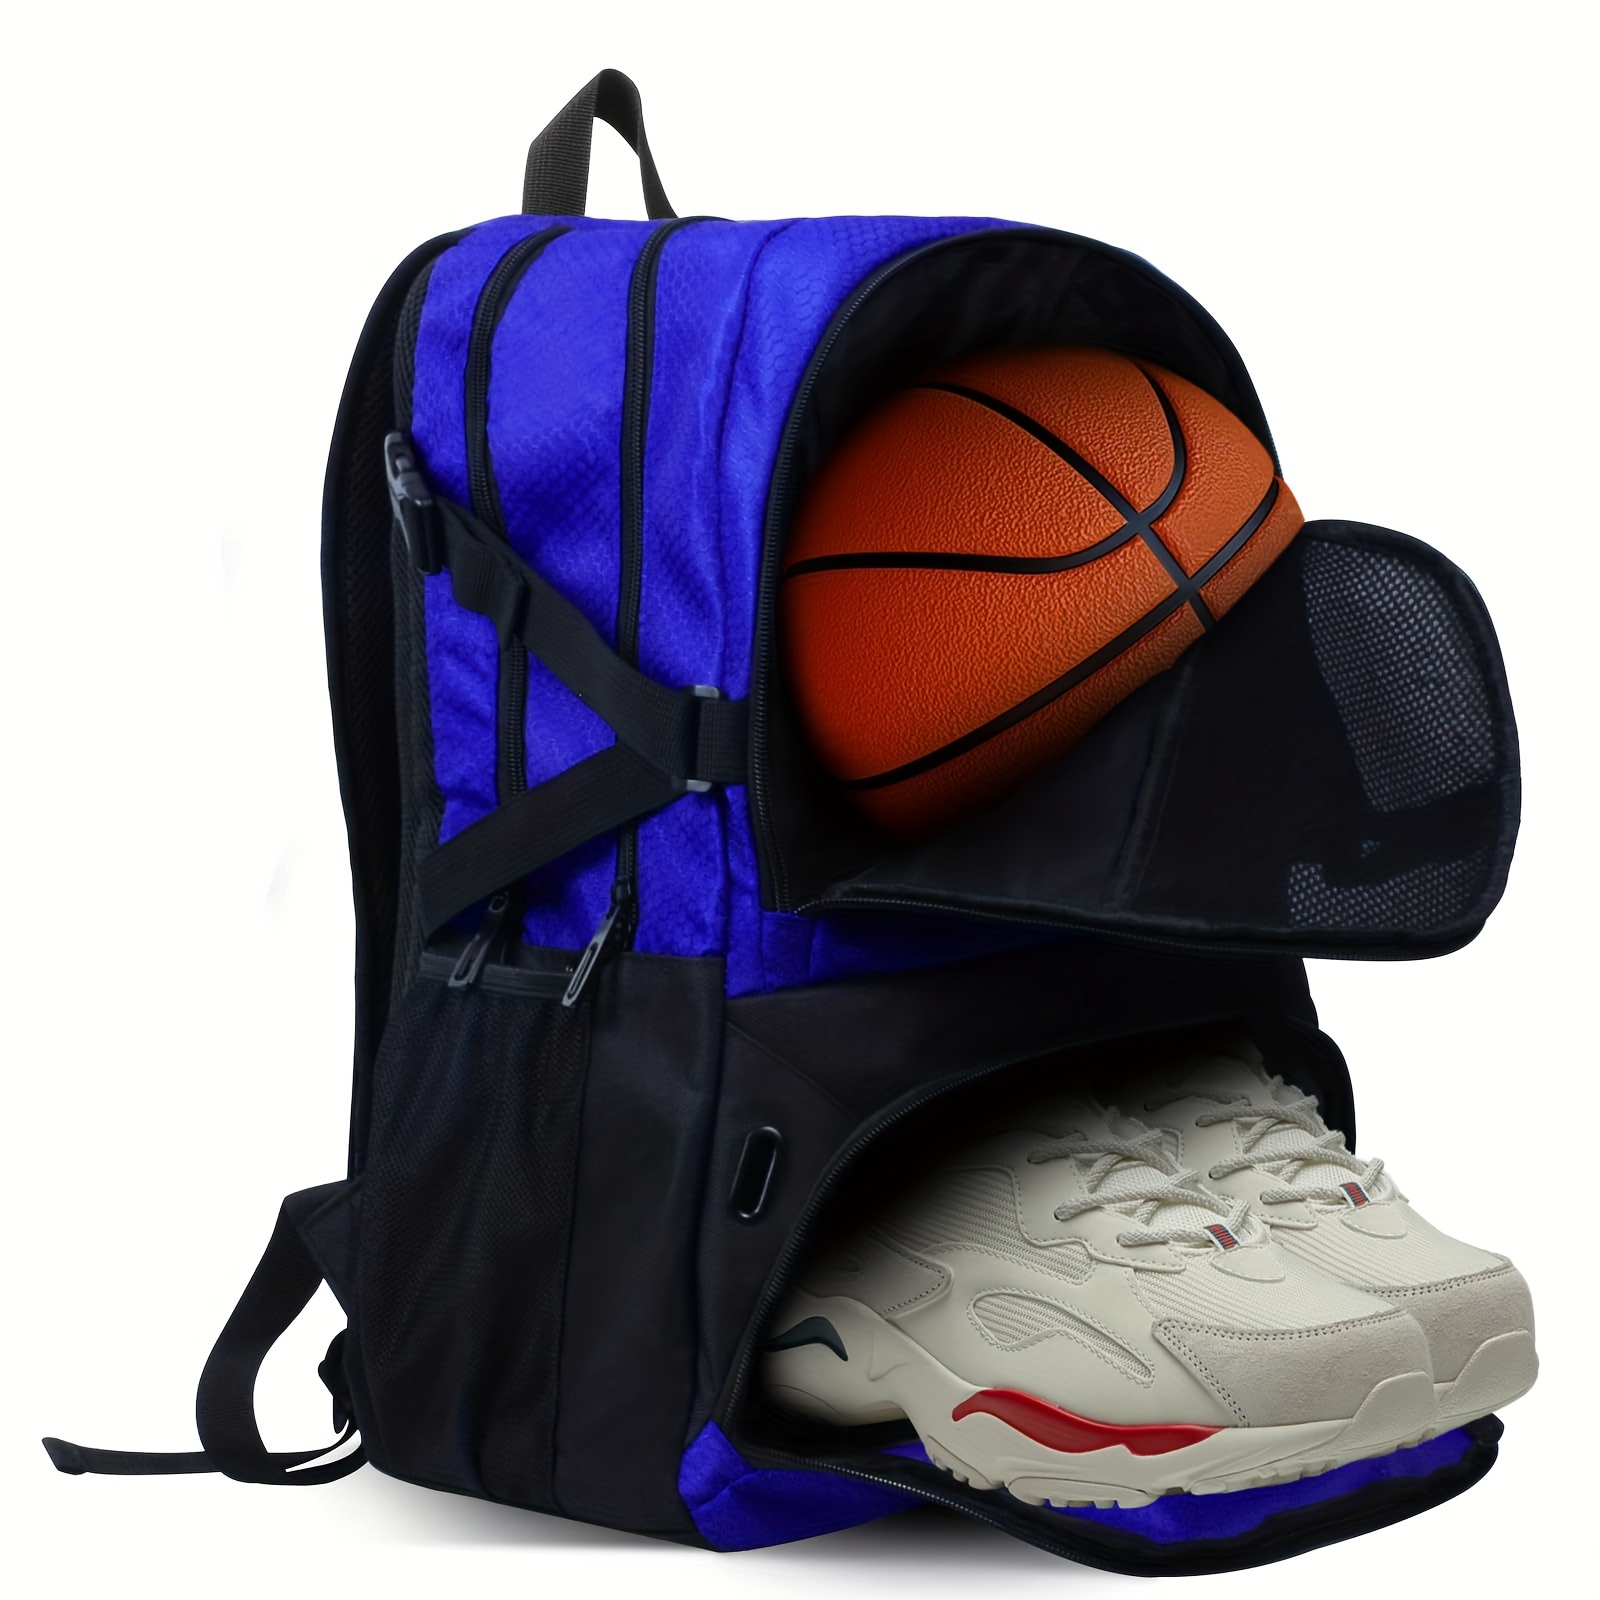 

30l Basketball Backpack, Waterproof Basketball Bag With Large Shoe And Ball Compartment, Backpack For Women Men, Sports Equipment Bag For Soccer, Volleyball, Gym, Outdoor, Travel